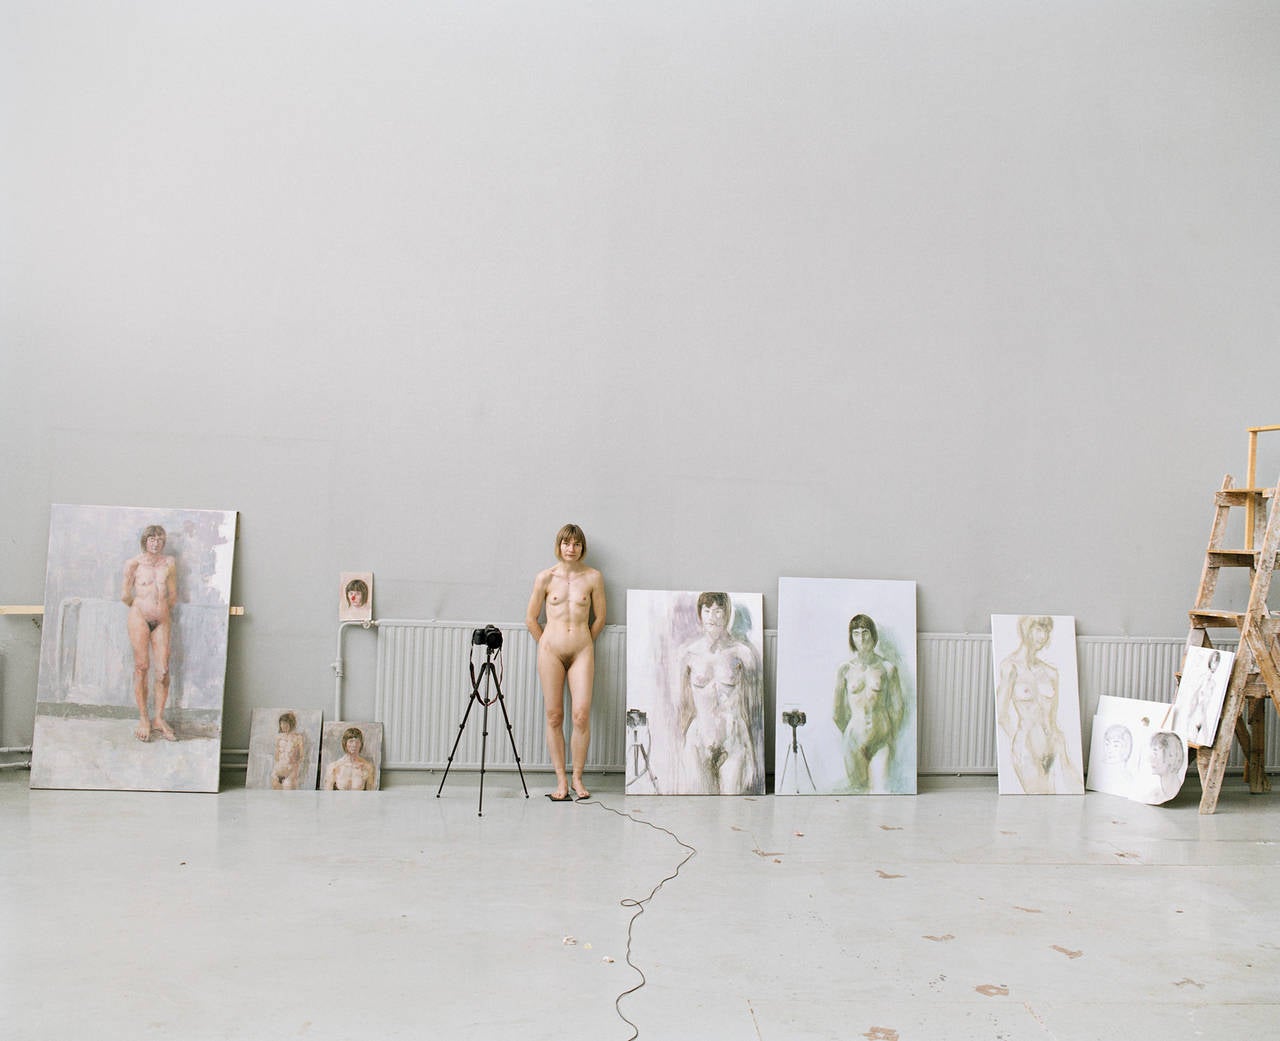 Artists at Work 9 - Photograph by Elina Brotherus